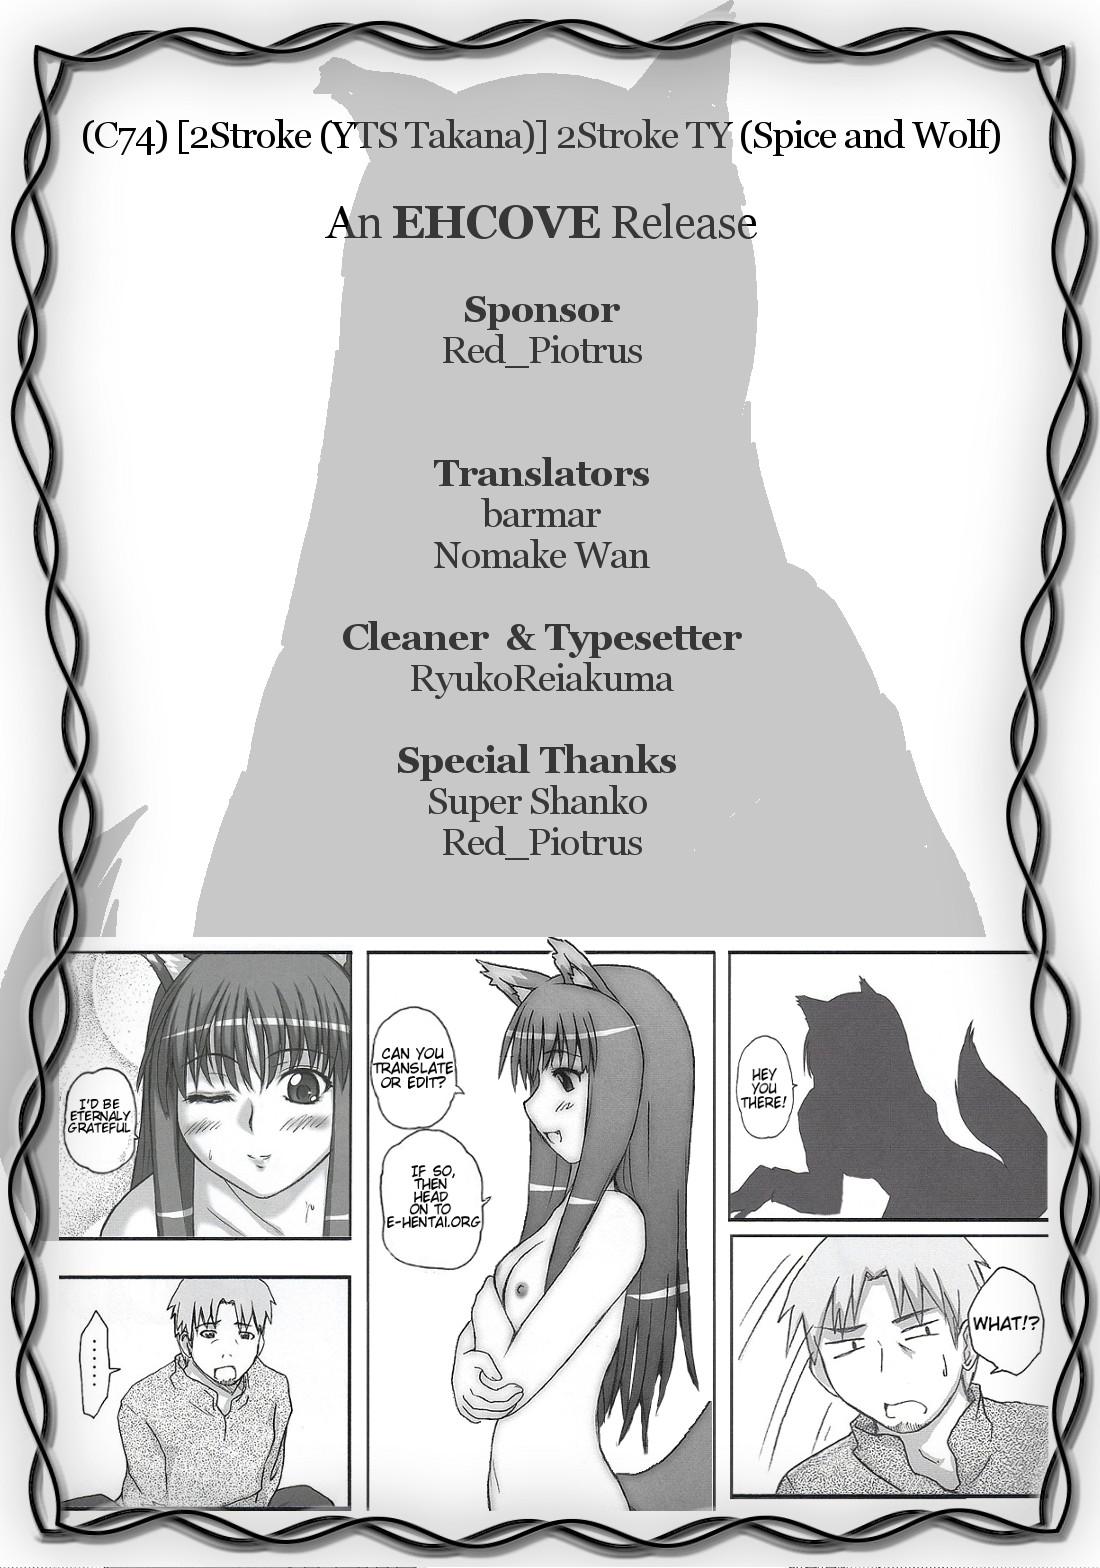 Cojiendo 2Stroke TY - Spice and wolf Stepsister - Page 27